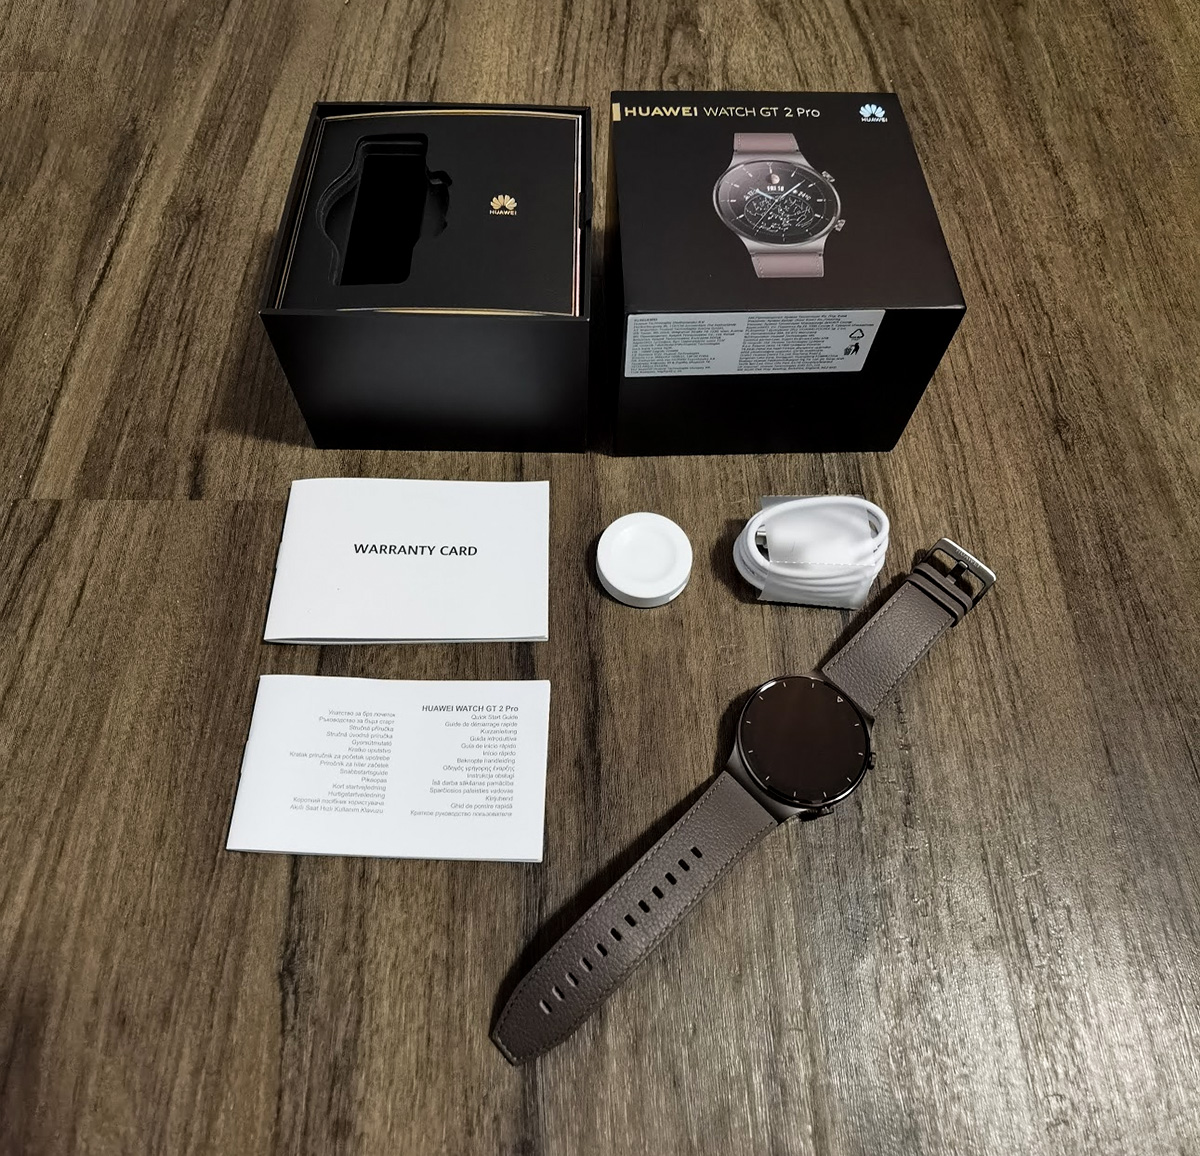 Huawei Watch GT 2 Pro Smartwatch what's included in the box 